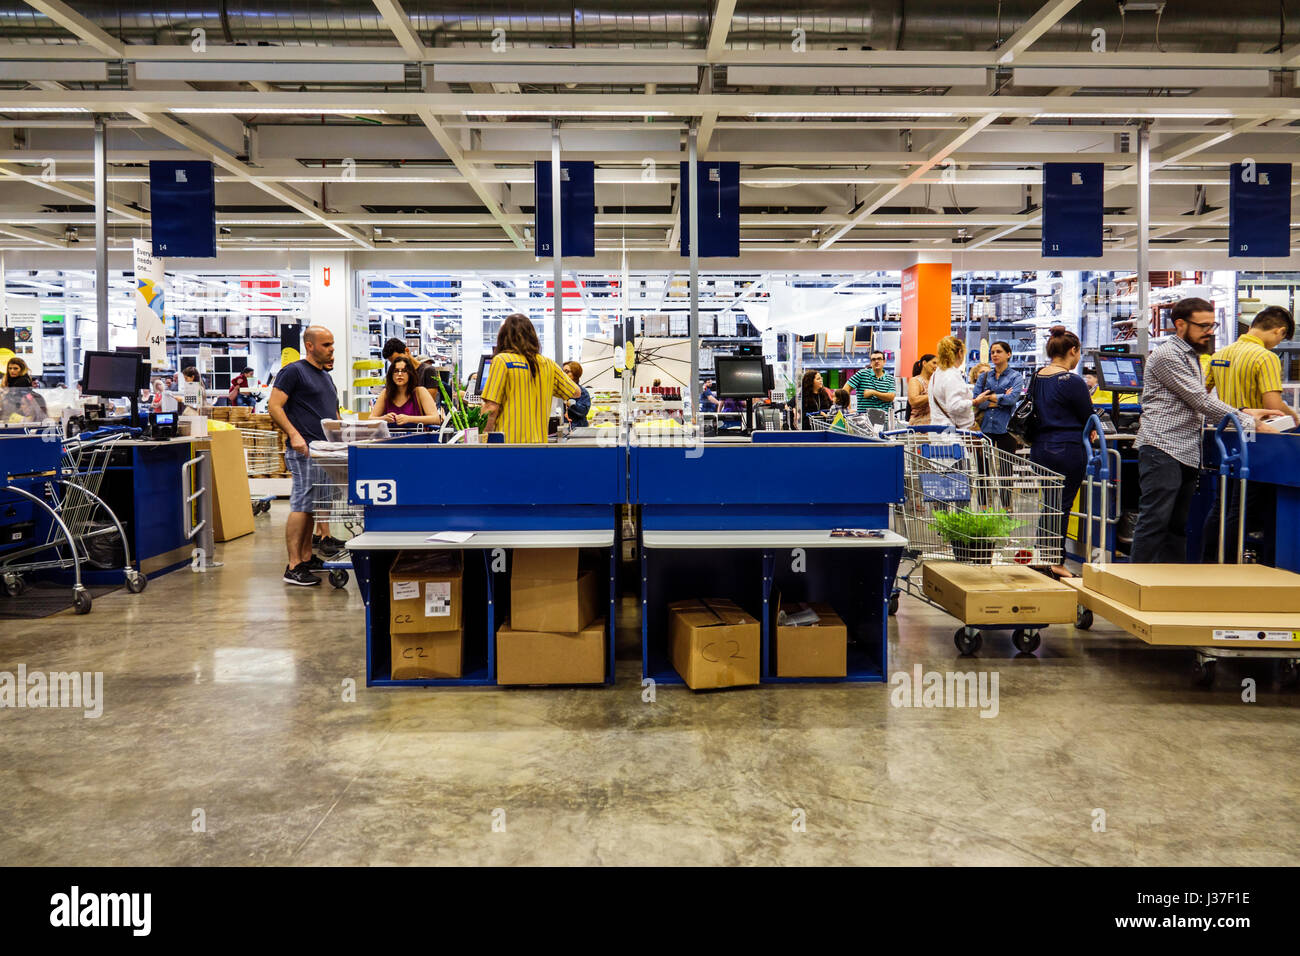 Miami Florida,Ikea,store,furniture,home accessories,shopping shopper shoppers shop shops market markets marketplace buying selling,retail store stores Stock Photo